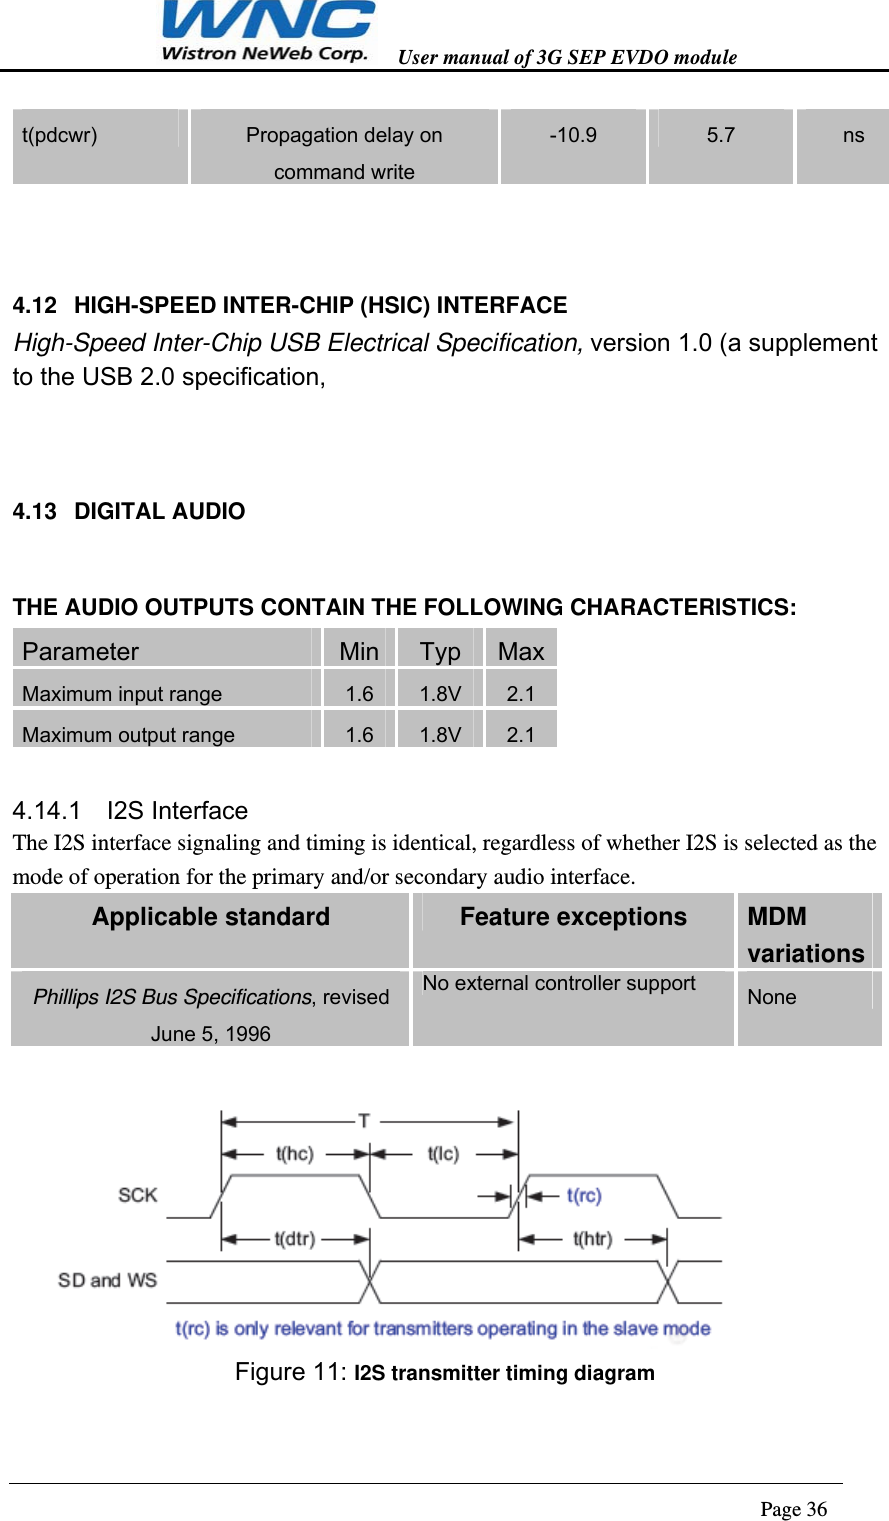   User manual of 3G SEP EVDO module                                                                      Page 36  t(pdcwr)  Propagation delay on command write -10.9  5.7  ns  4.12  HIGH-SPEED INTER-CHIP (HSIC) INTERFACE High-Speed Inter-Chip USB Electrical Specification, version 1.0 (a supplement to the USB 2.0 specification,  4.13  DIGITAL AUDIO THE AUDIO OUTPUTS CONTAIN THE FOLLOWING CHARACTERISTICS:   4.14.1  I2S Interface The I2S interface signaling and timing is identical, regardless of whether I2S is selected as the mode of operation for the primary and/or secondary audio interface. Applicable standard Feature exceptions MDM variationsPhillips I2S Bus Specifications, revised June 5, 1996 No external controller support  None   Figure 11: I2S transmitter timing diagram  Parameter  Min Typ  MaxMaximum input range  1.6  1.8V  2.1 Maximum output range  1.6  1.8V  2.1 